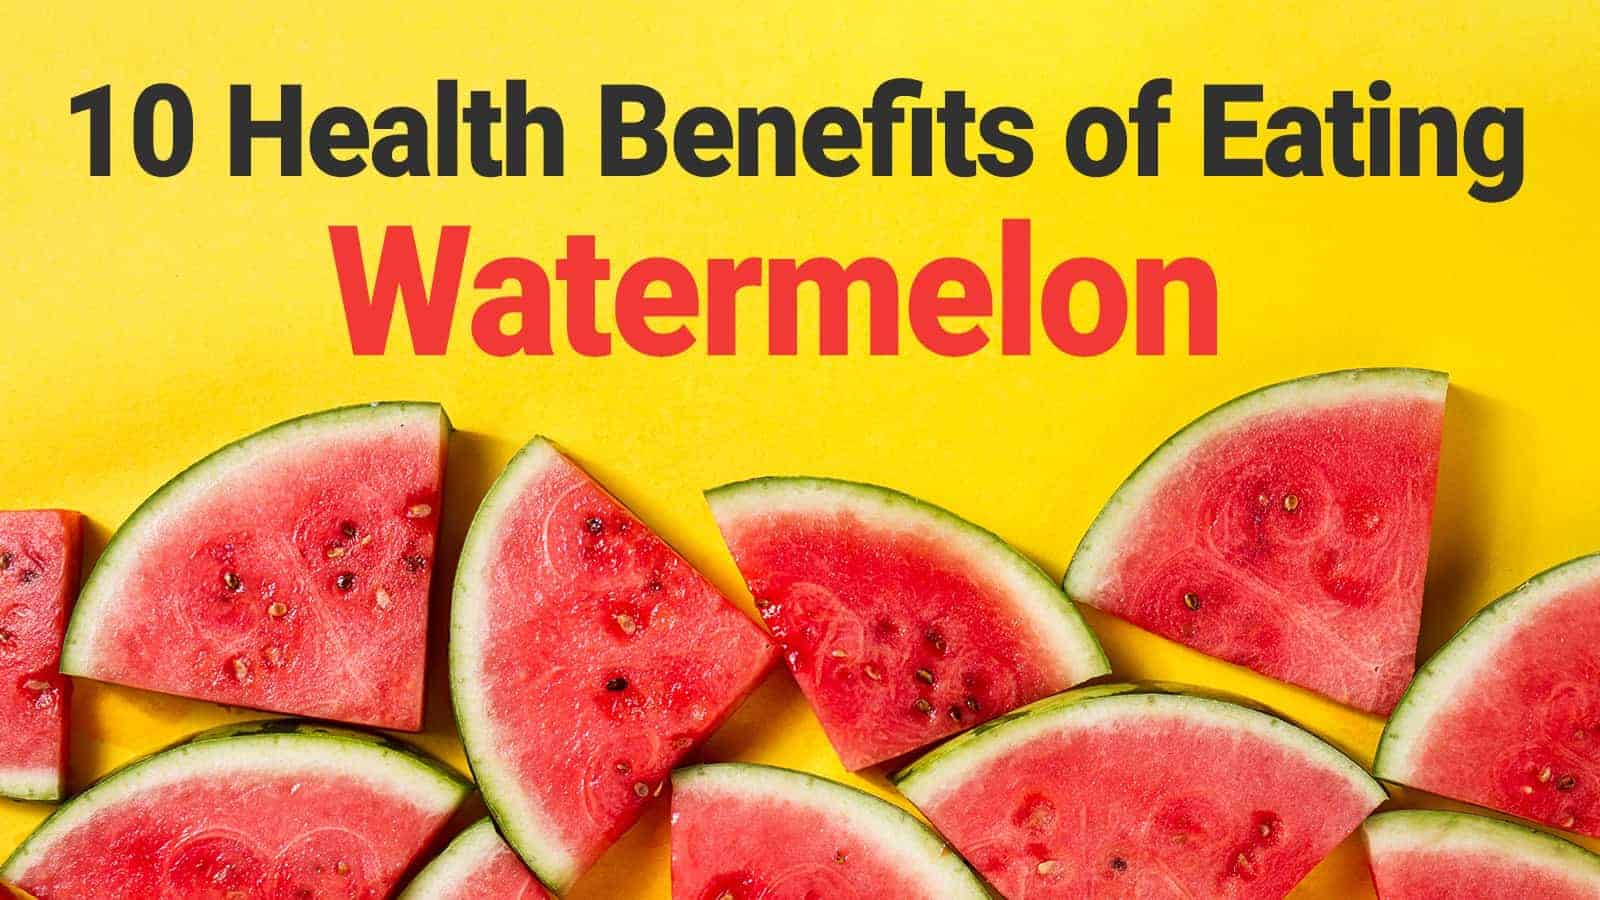 10 Health Benefits of Eating Watermelon